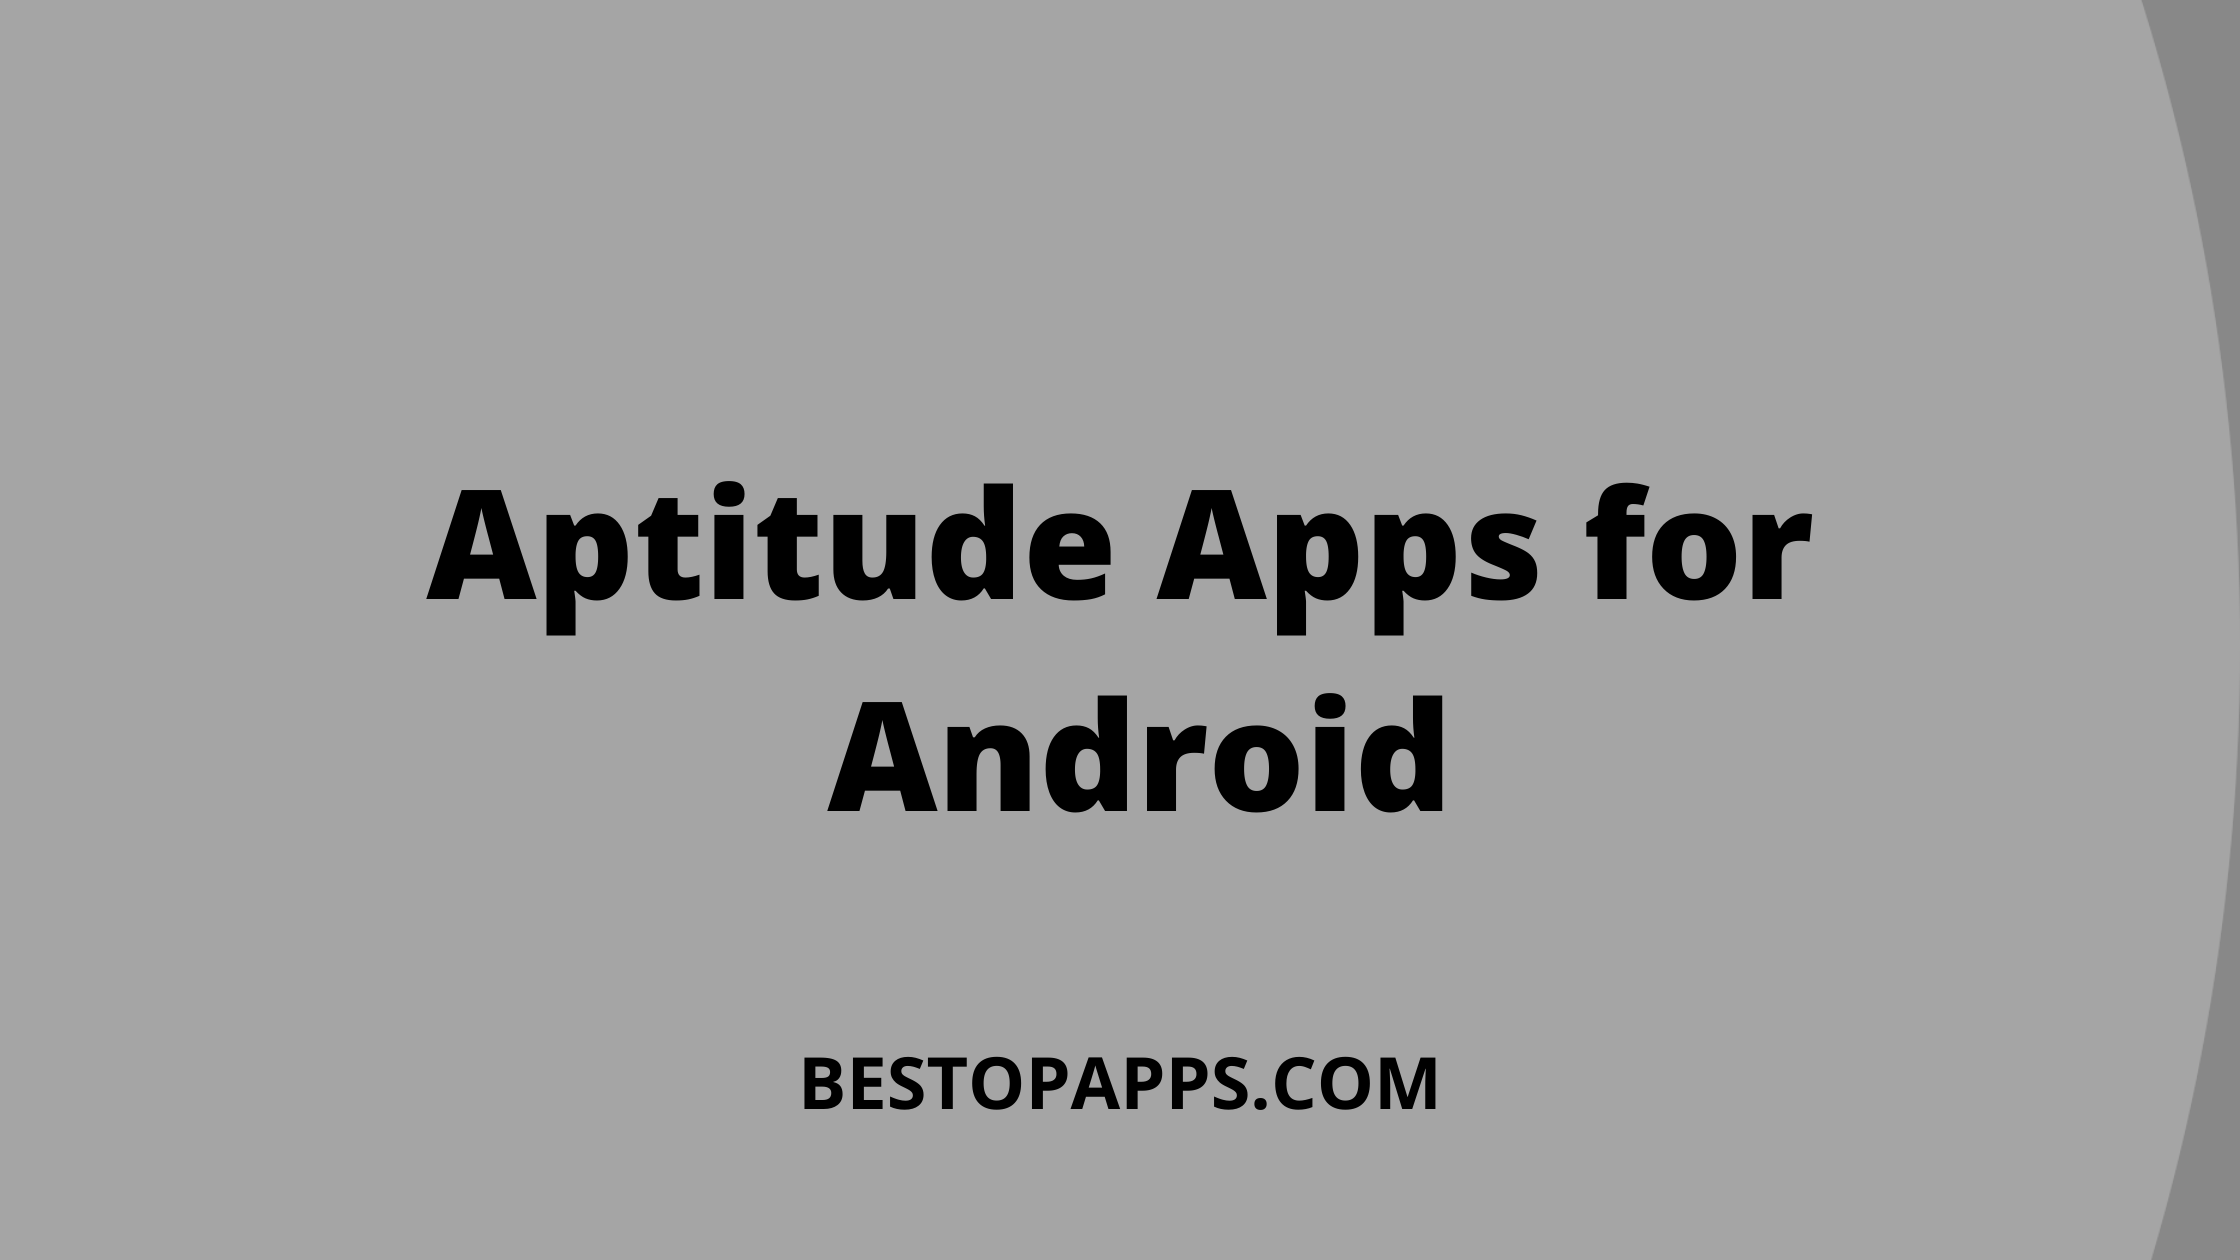 Aptitude Apps for Android